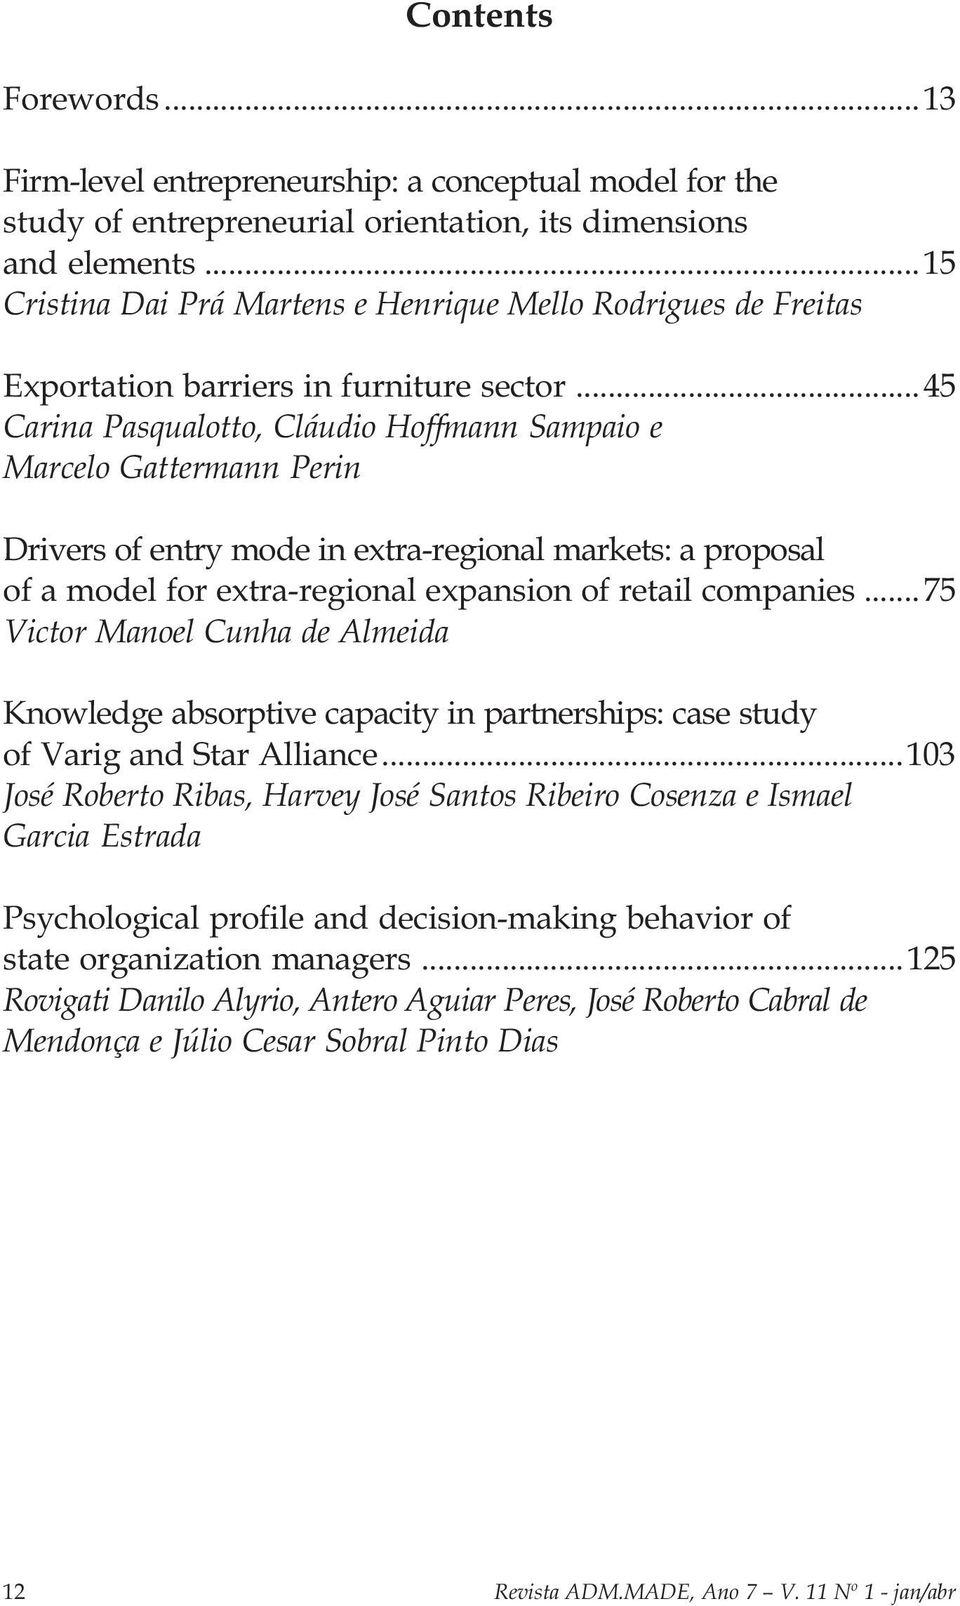 ..45 Carina Pasqualotto, Cláudio Hoffmann Sampaio e Marcelo Gattermann Perin Drivers of entry mode in extra-regional markets: a proposal of a model for extra-regional expansion of retail companies.